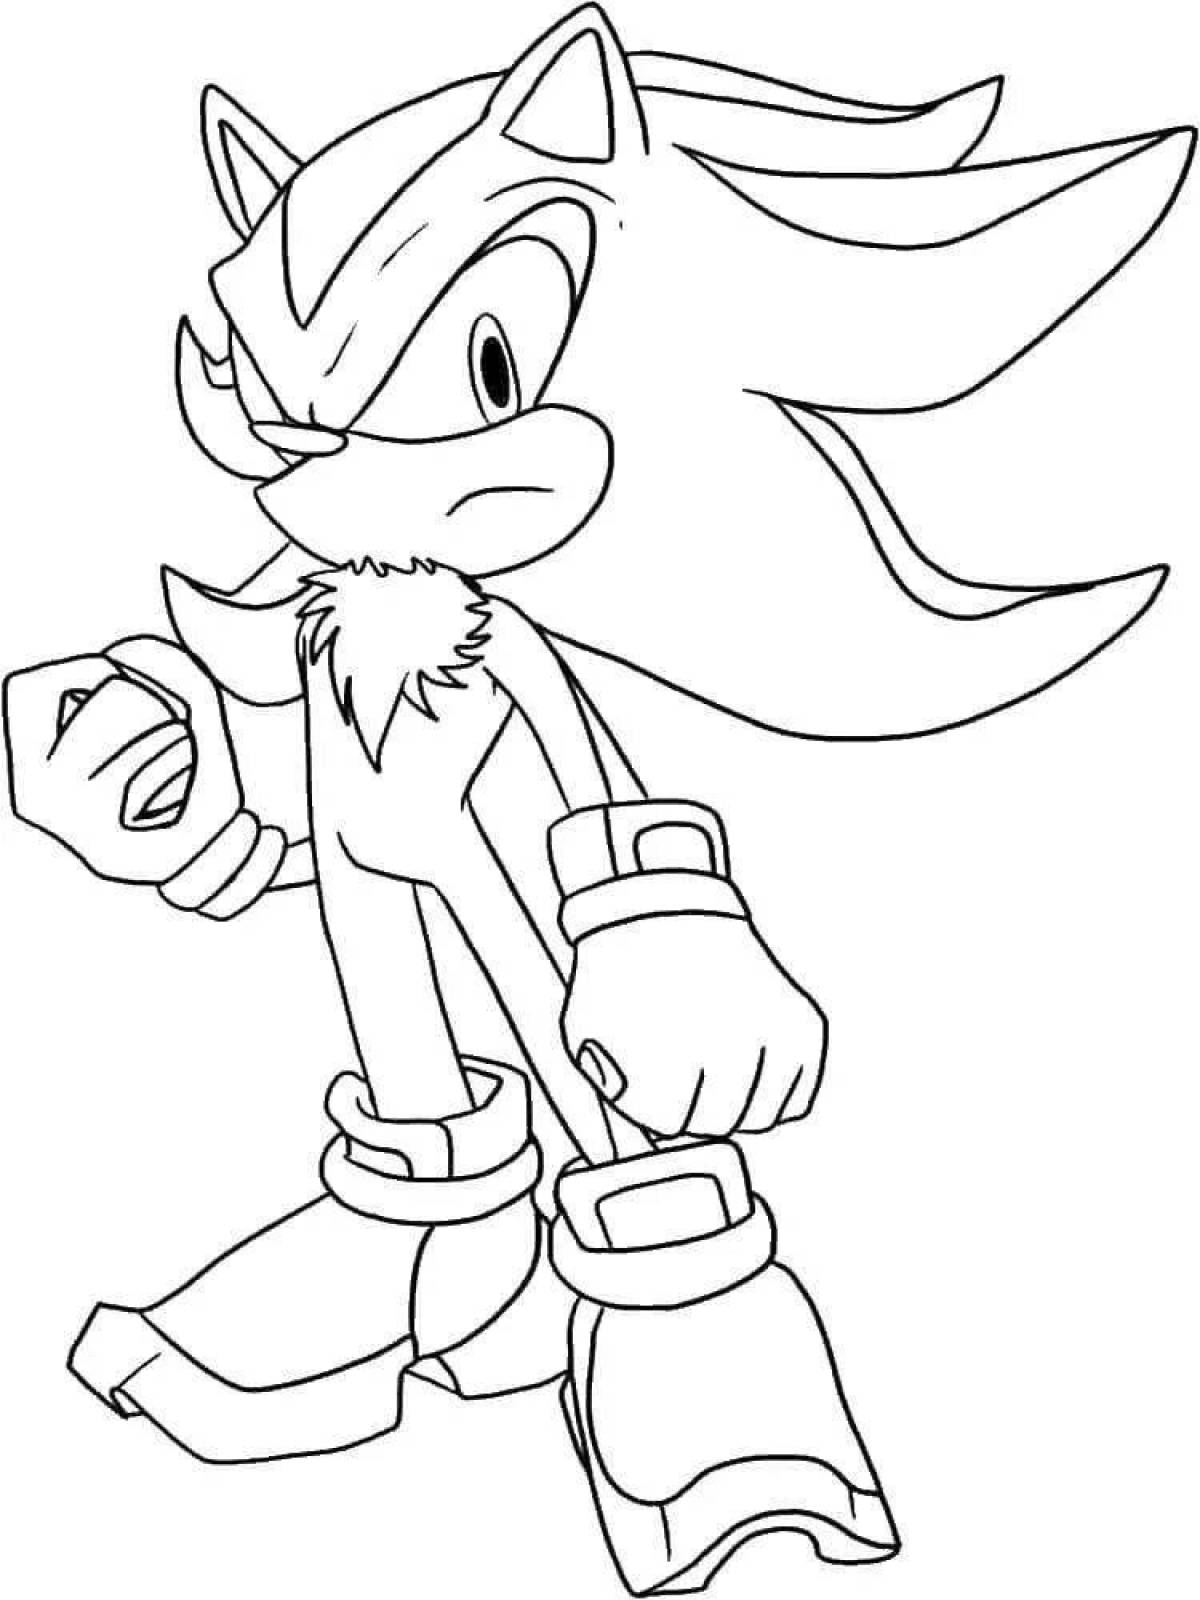 Sonic heroes dazzling coloring book